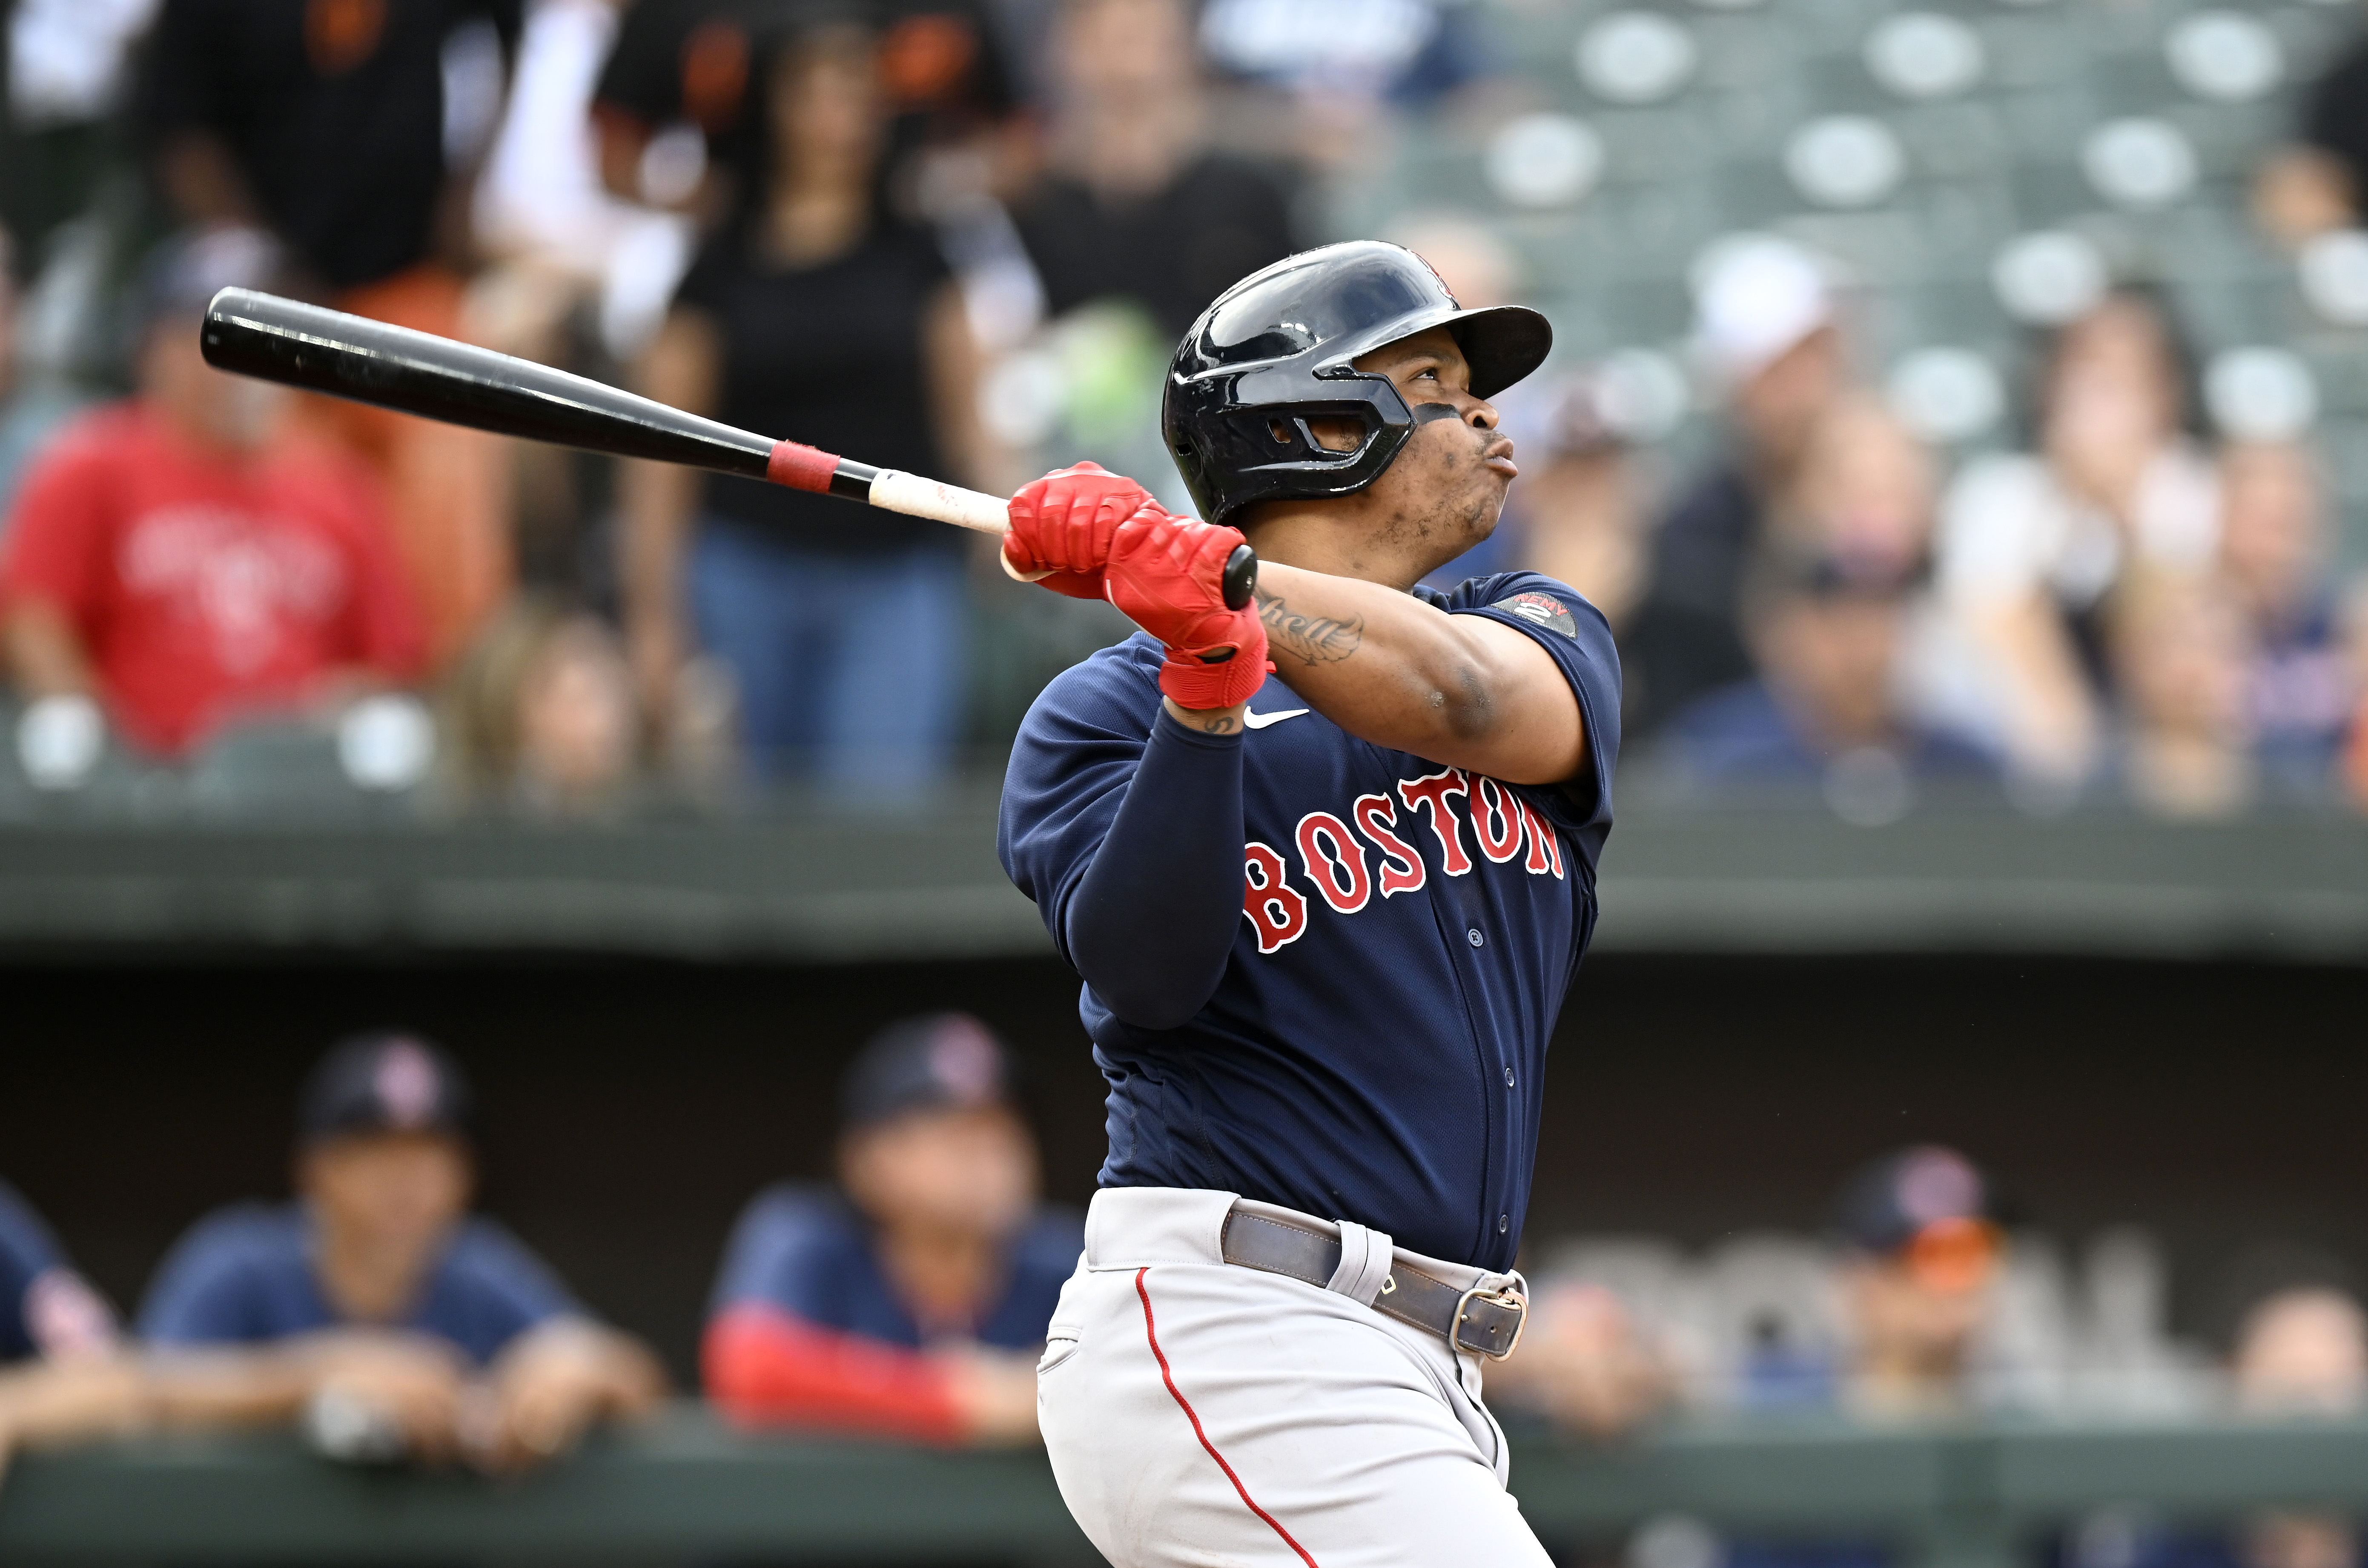 Red Sox back at .500 after falling to surging Orioles, 6-2 - CBS